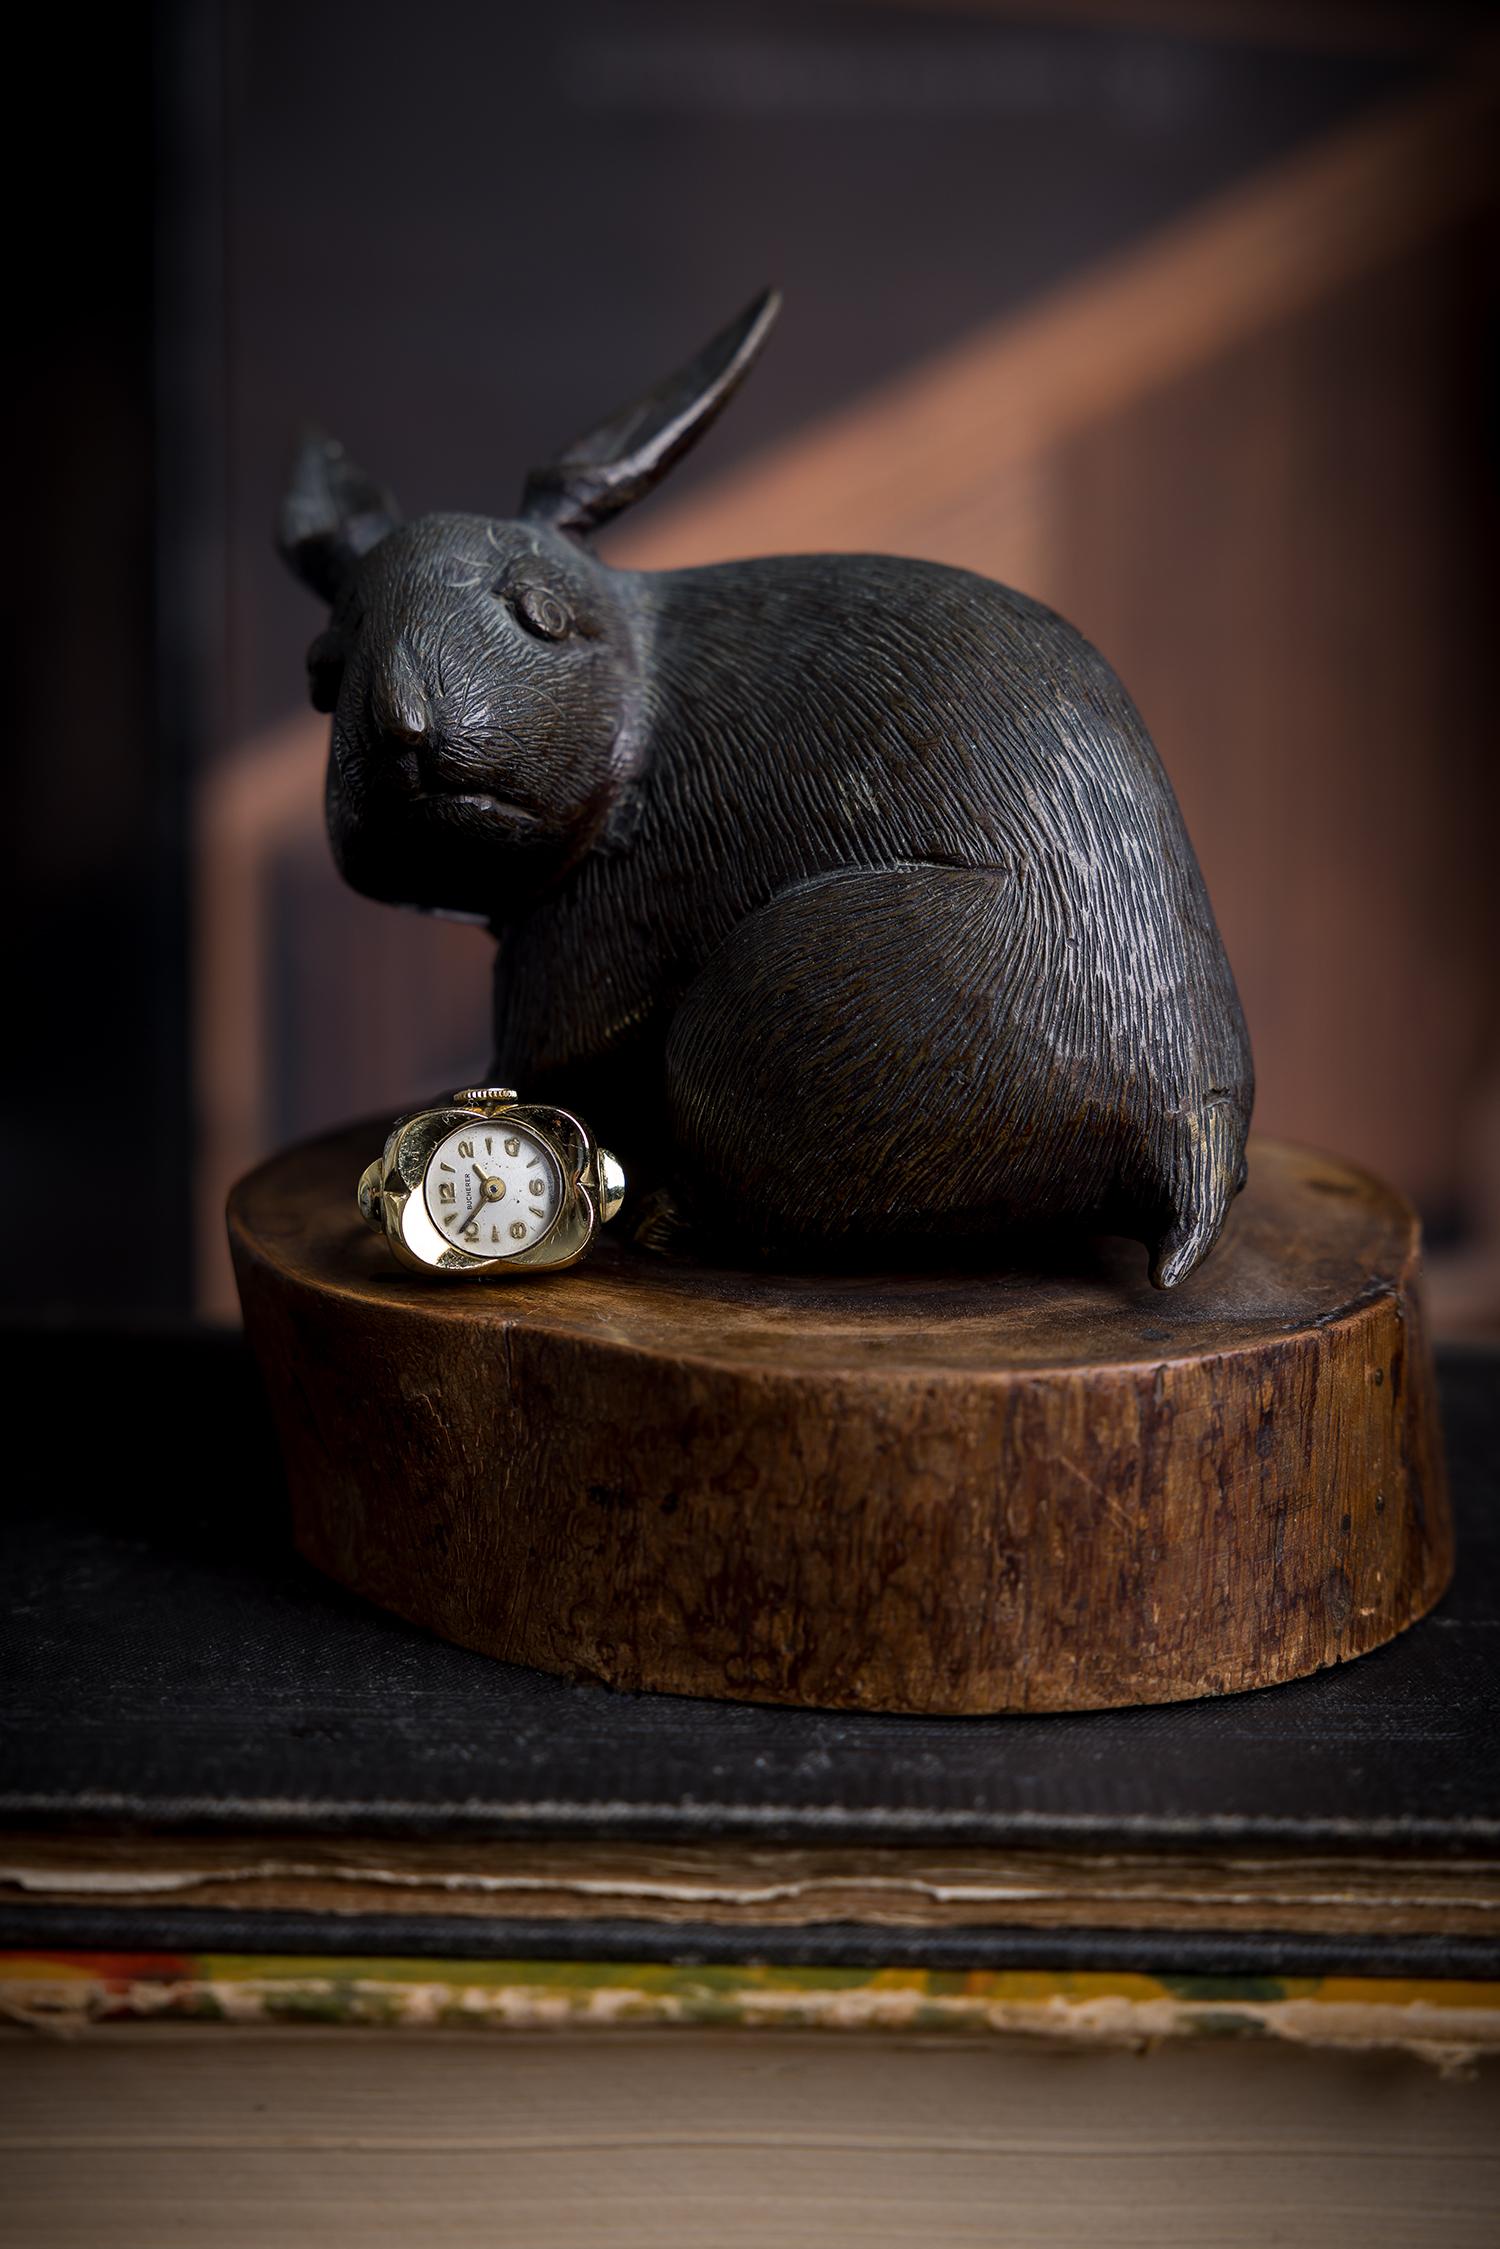 You better watch out!

A delightful chunky little nugget. Not something you see everyday but ring watches have been around since the 18th century. This hip little piece is from the 1960s, signed Bucherer.

With a clear mid-century presence this